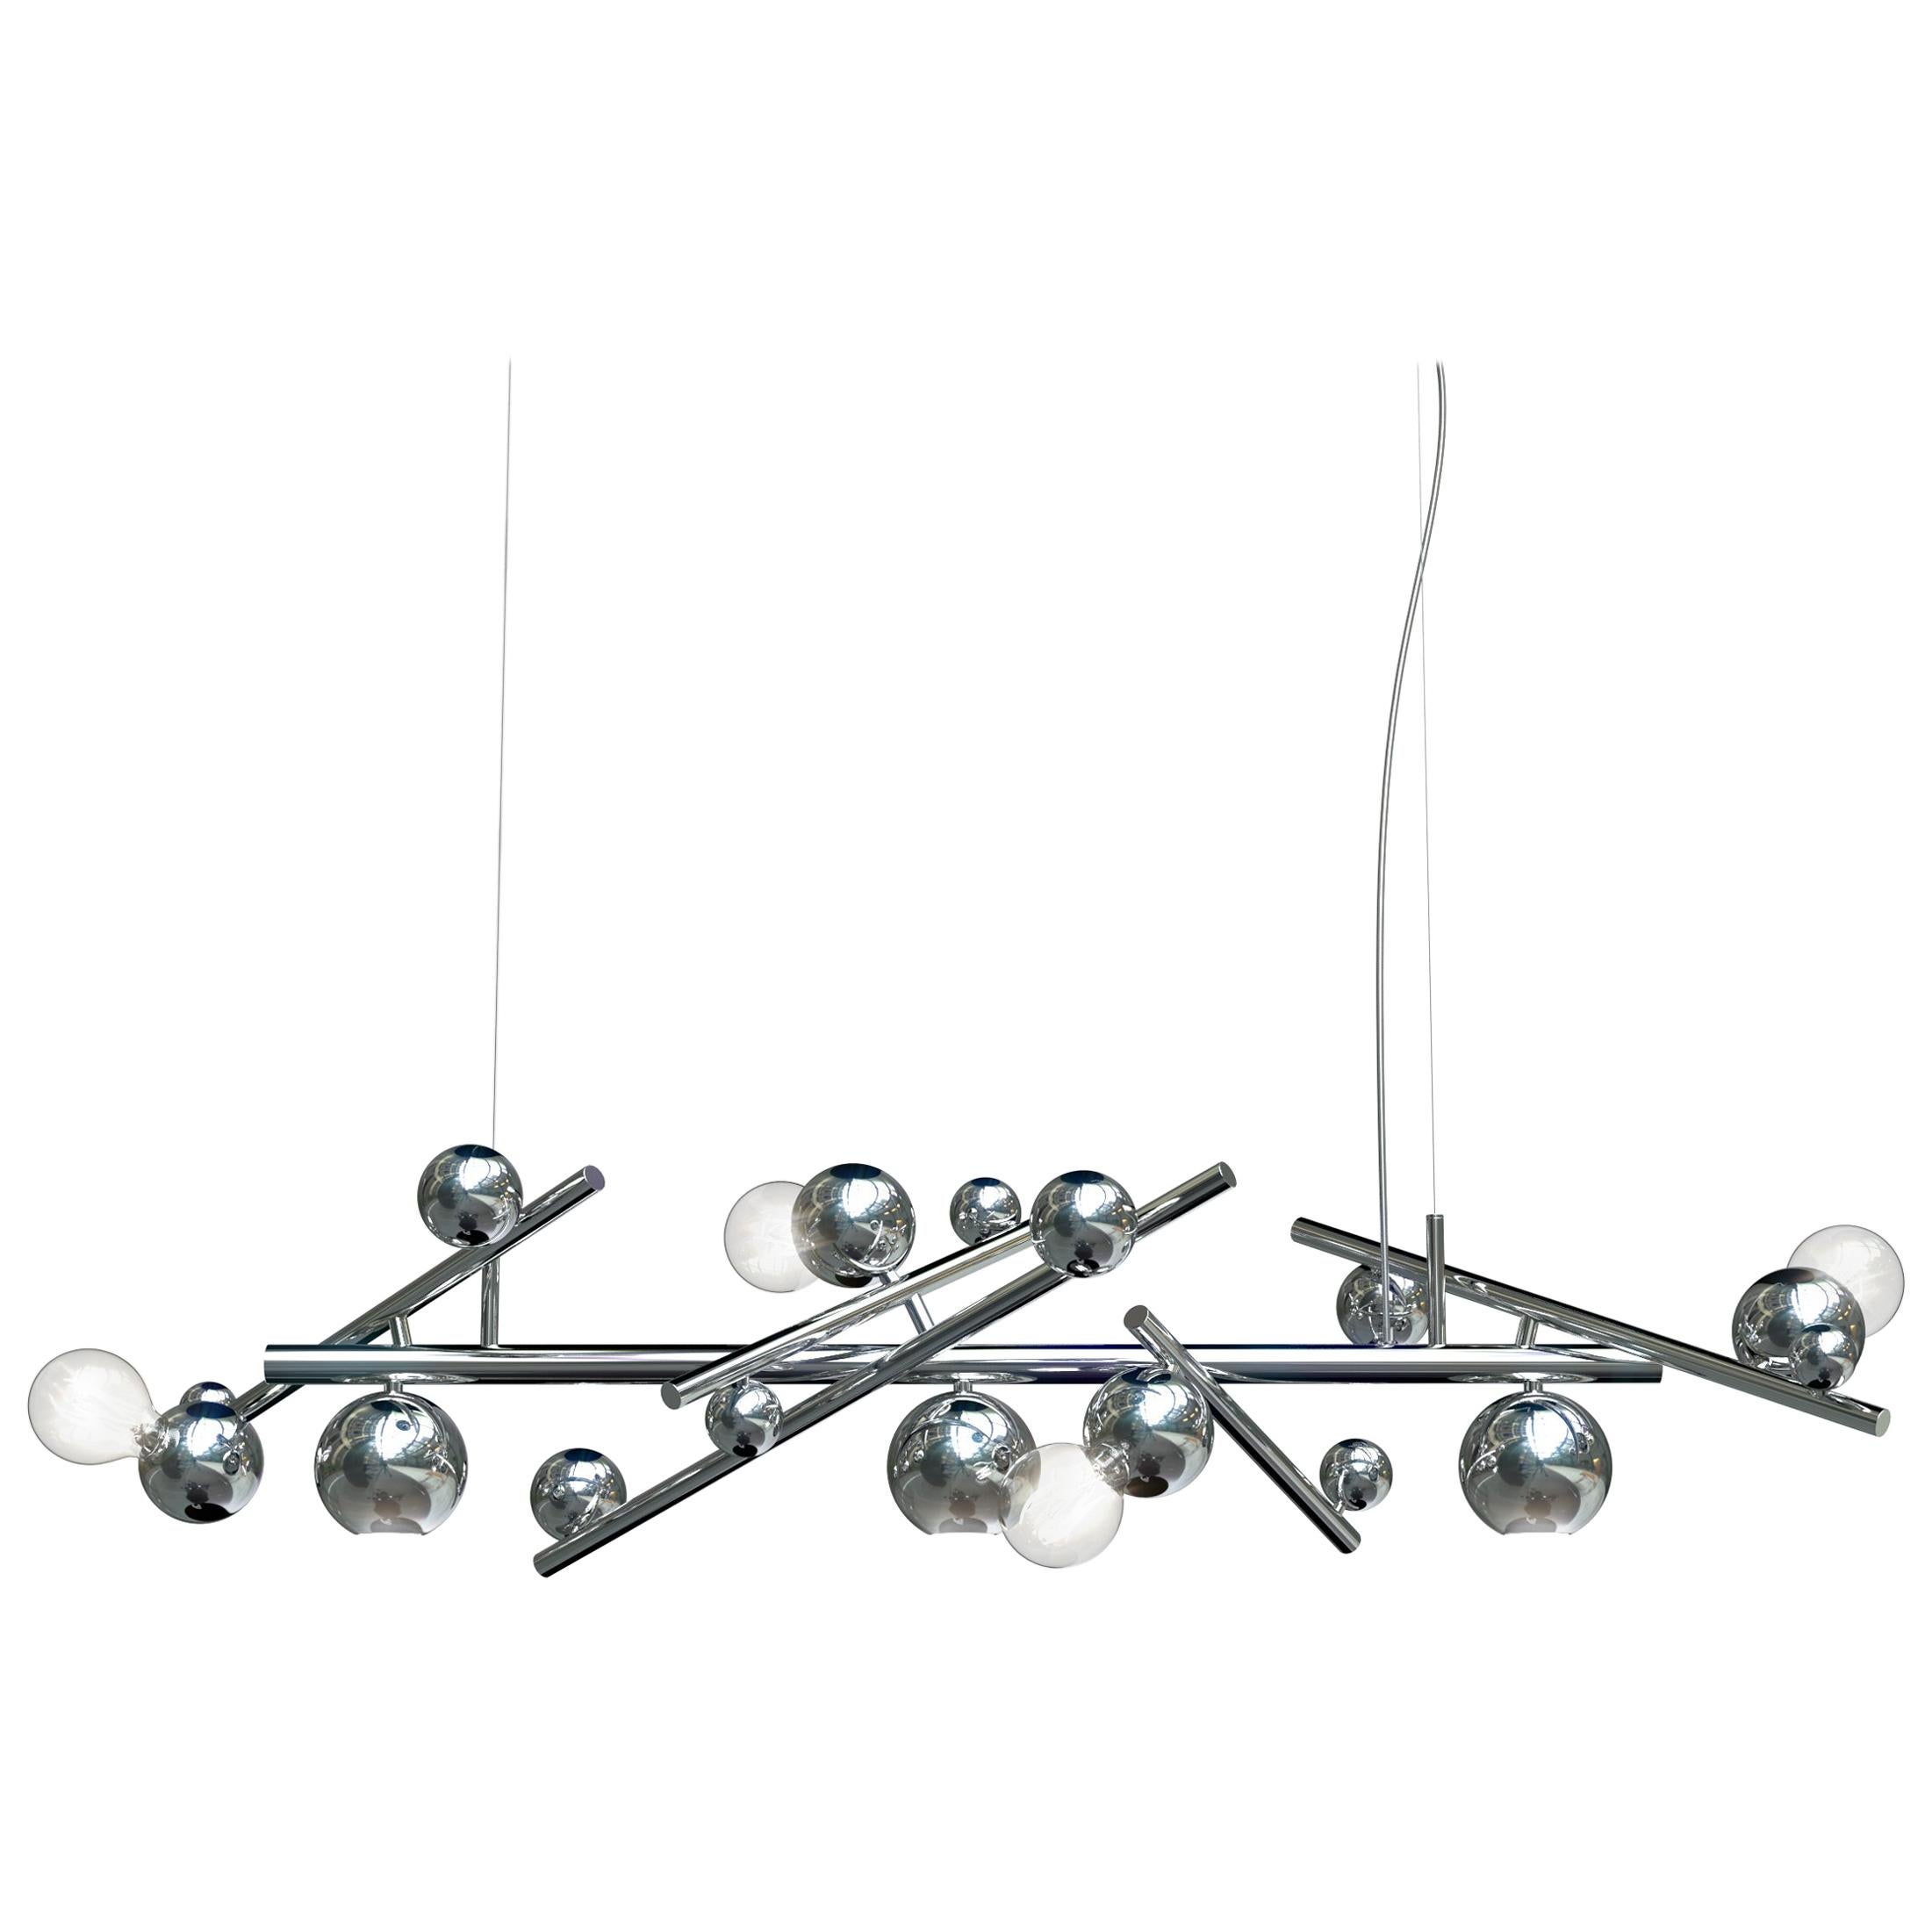 Modern Pendant in a Nickel Finish, Galaxy Collection, by Brand van Egmond   For Sale